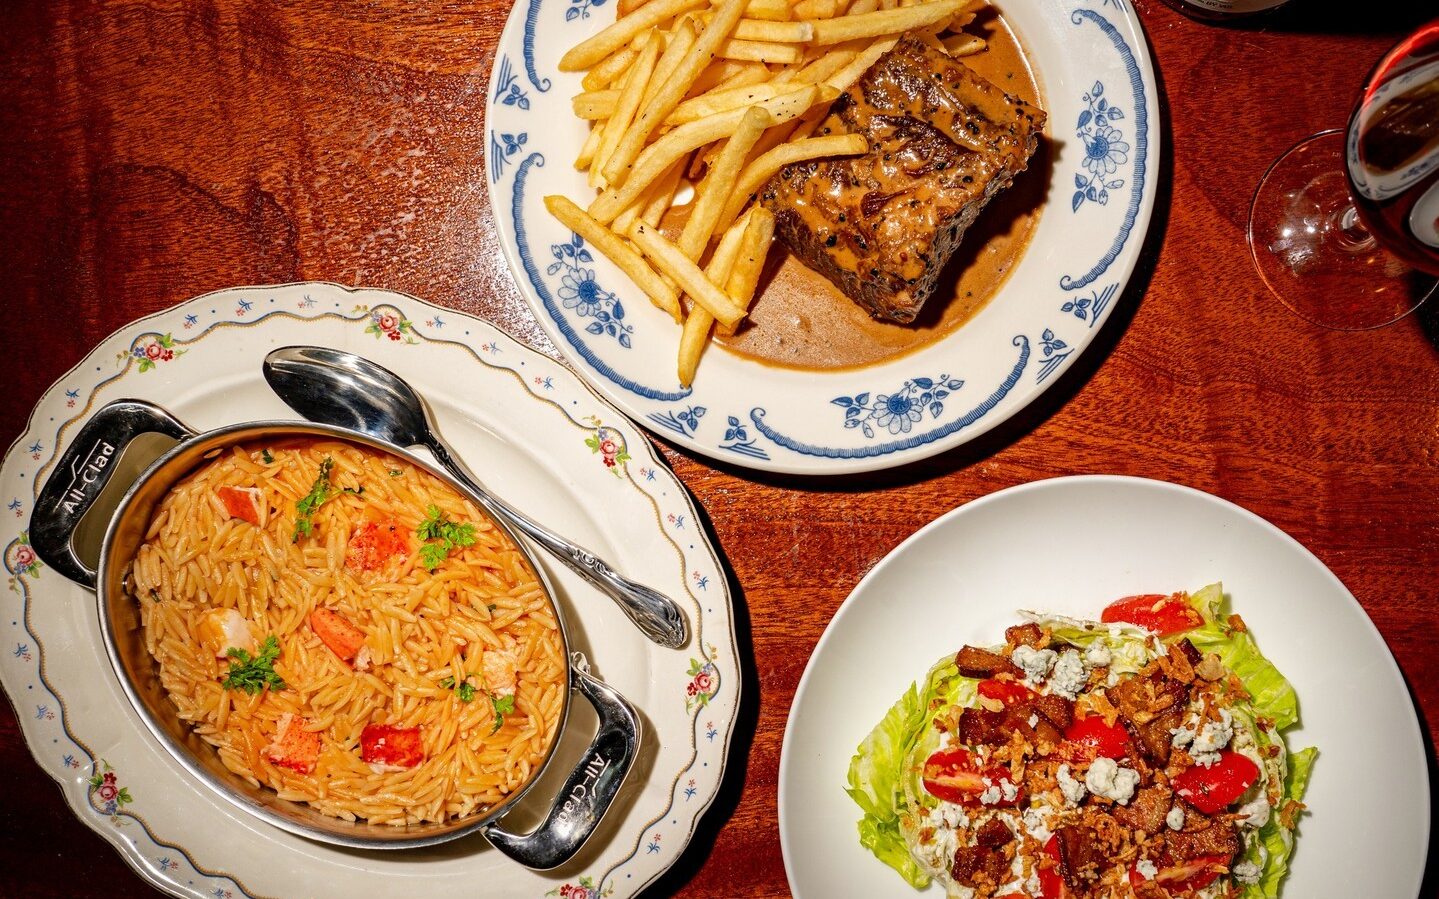 This Restaurant in Carroll Gardens Is Bringing Back American Bistro Classics